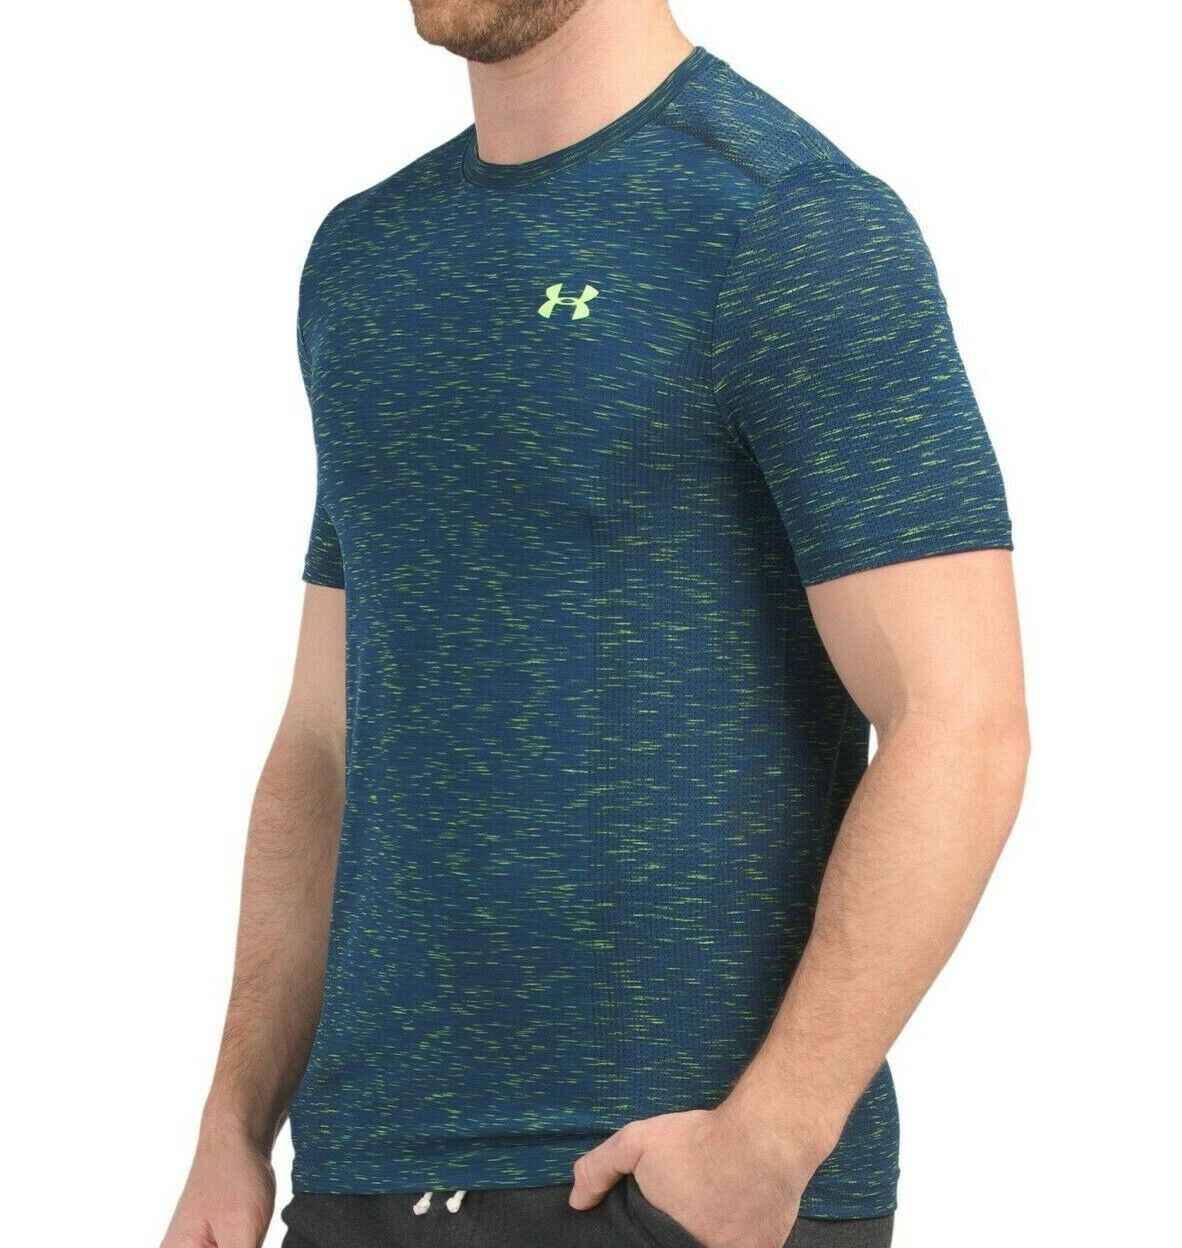 Primary image for NWT UNDER ARMOUR MSRP $43.99 MEN'S NAVY CREW NECK SHORT SLEEVE T-SHIRT SIZE L